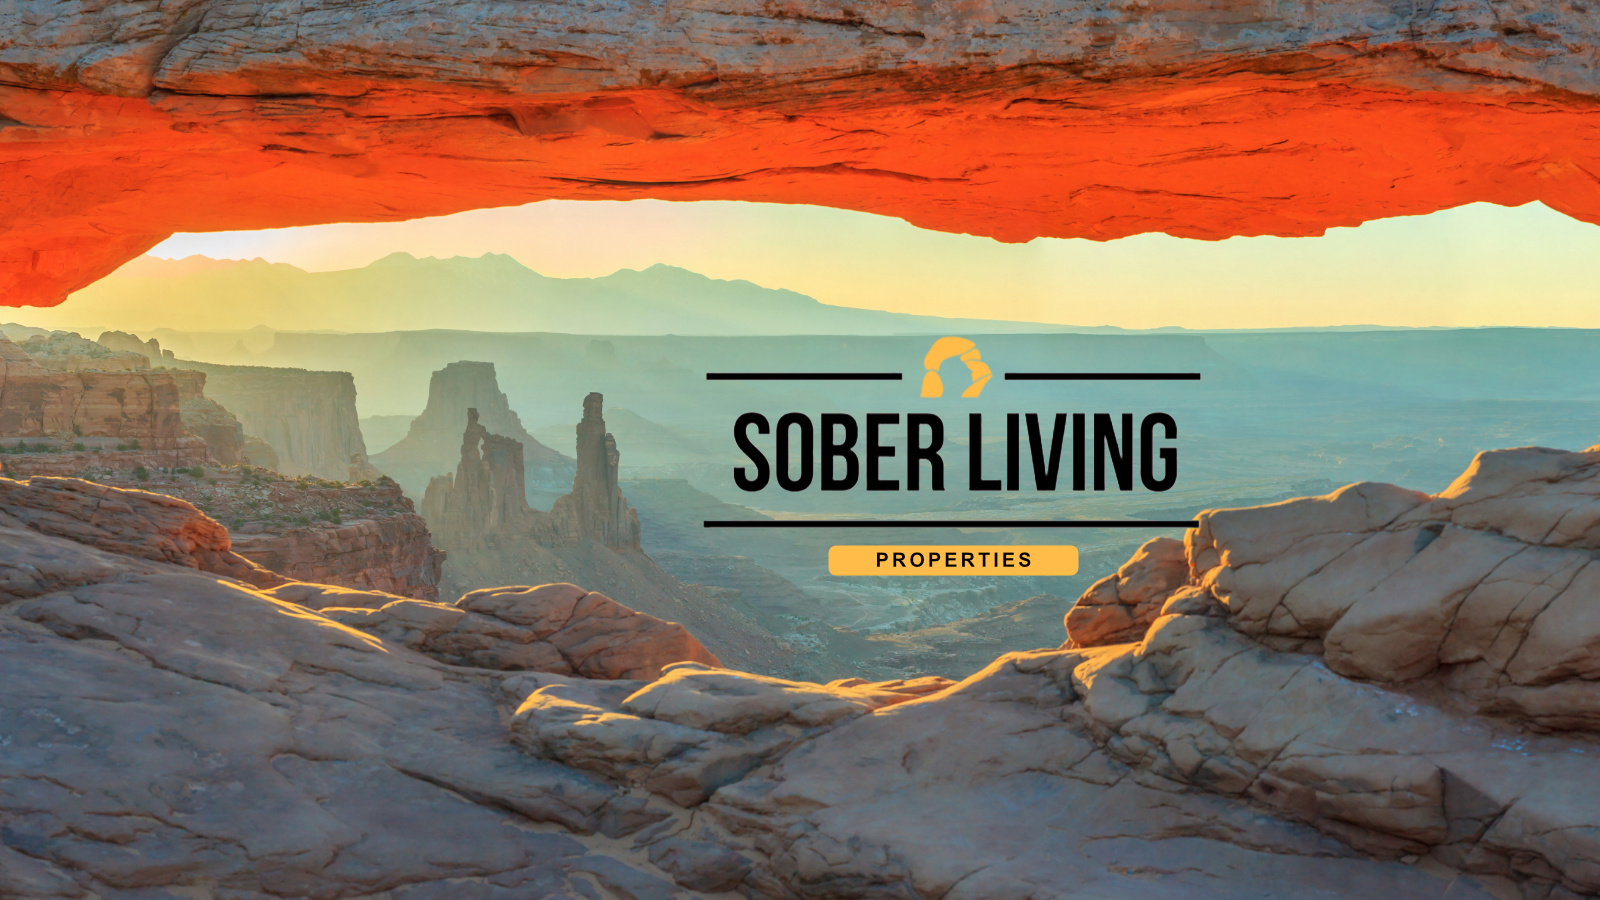 Sober Living Properties - Mid-Valley House